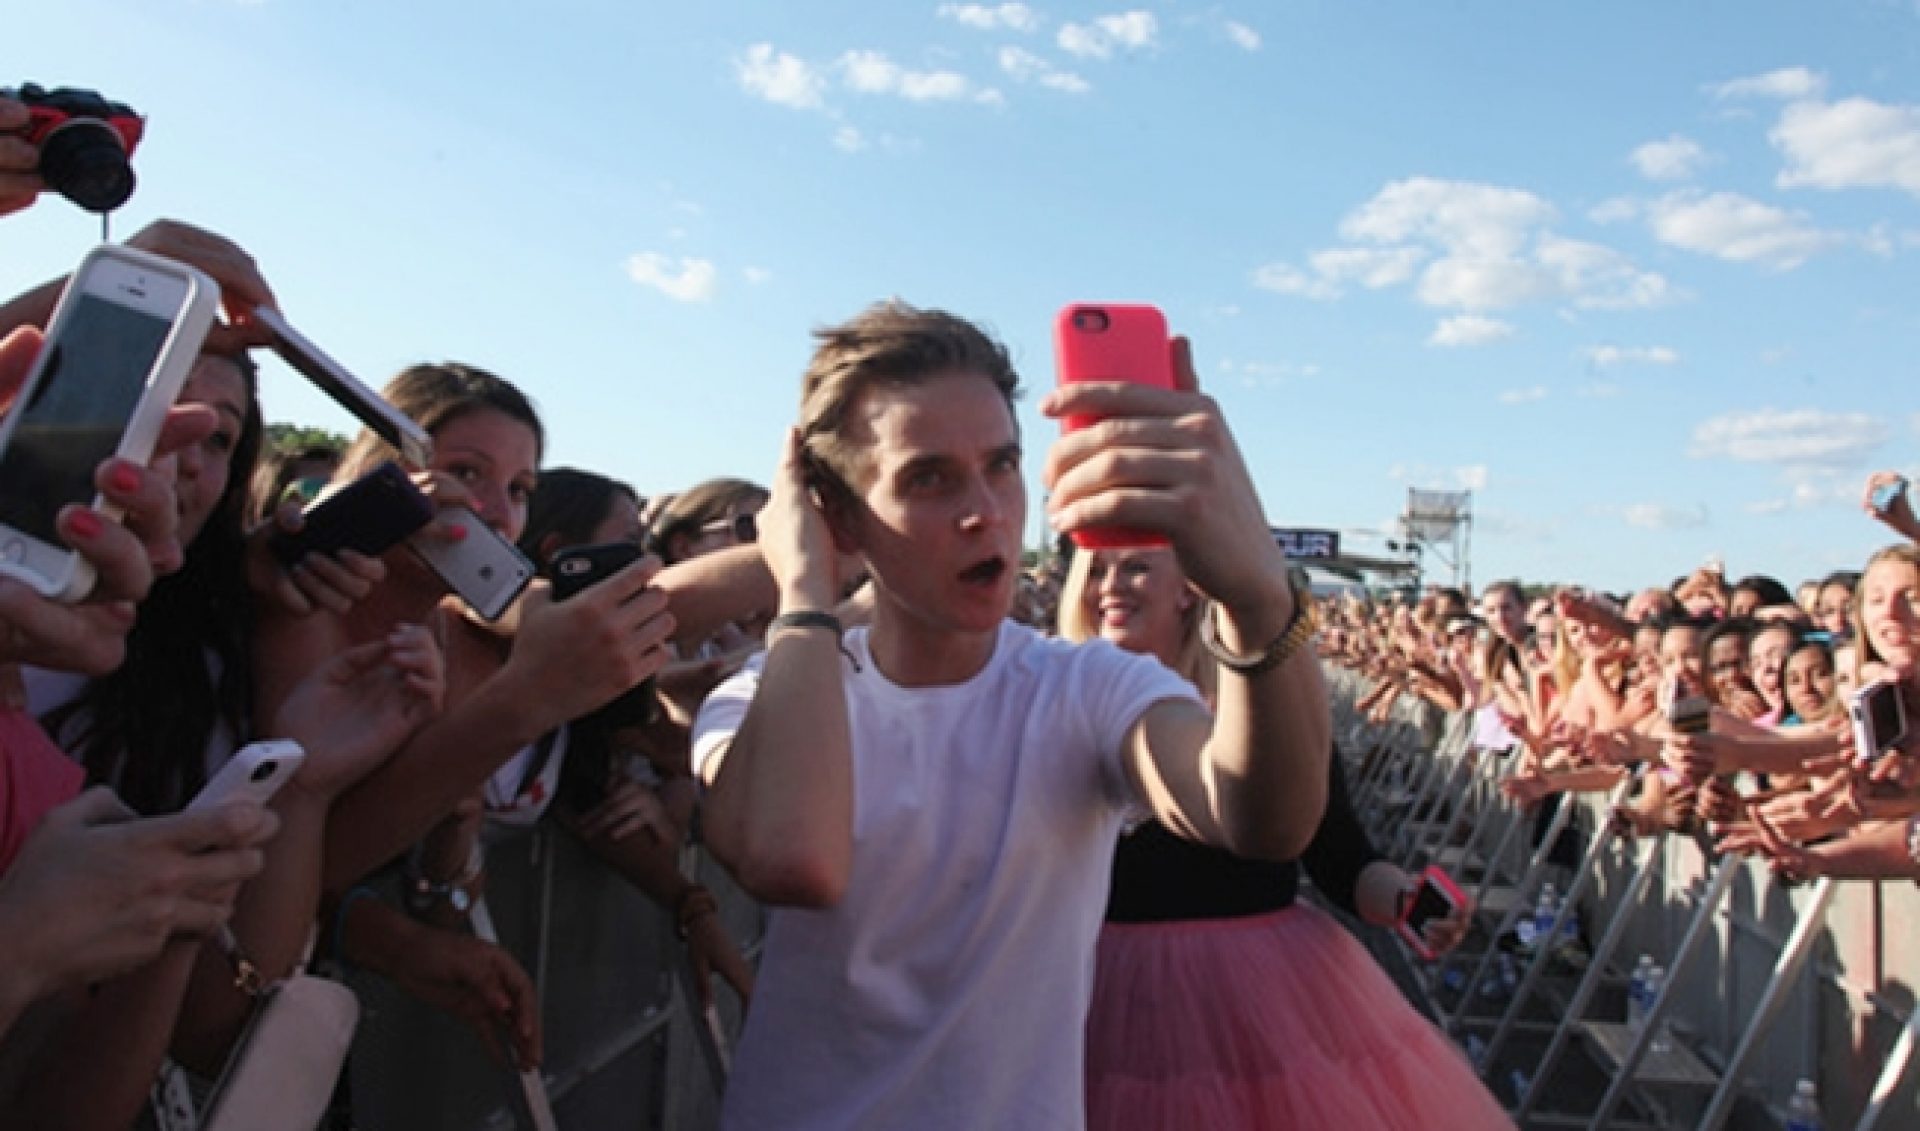 12,500 YouTube And Vine Fans Line Up For Digifest NYC